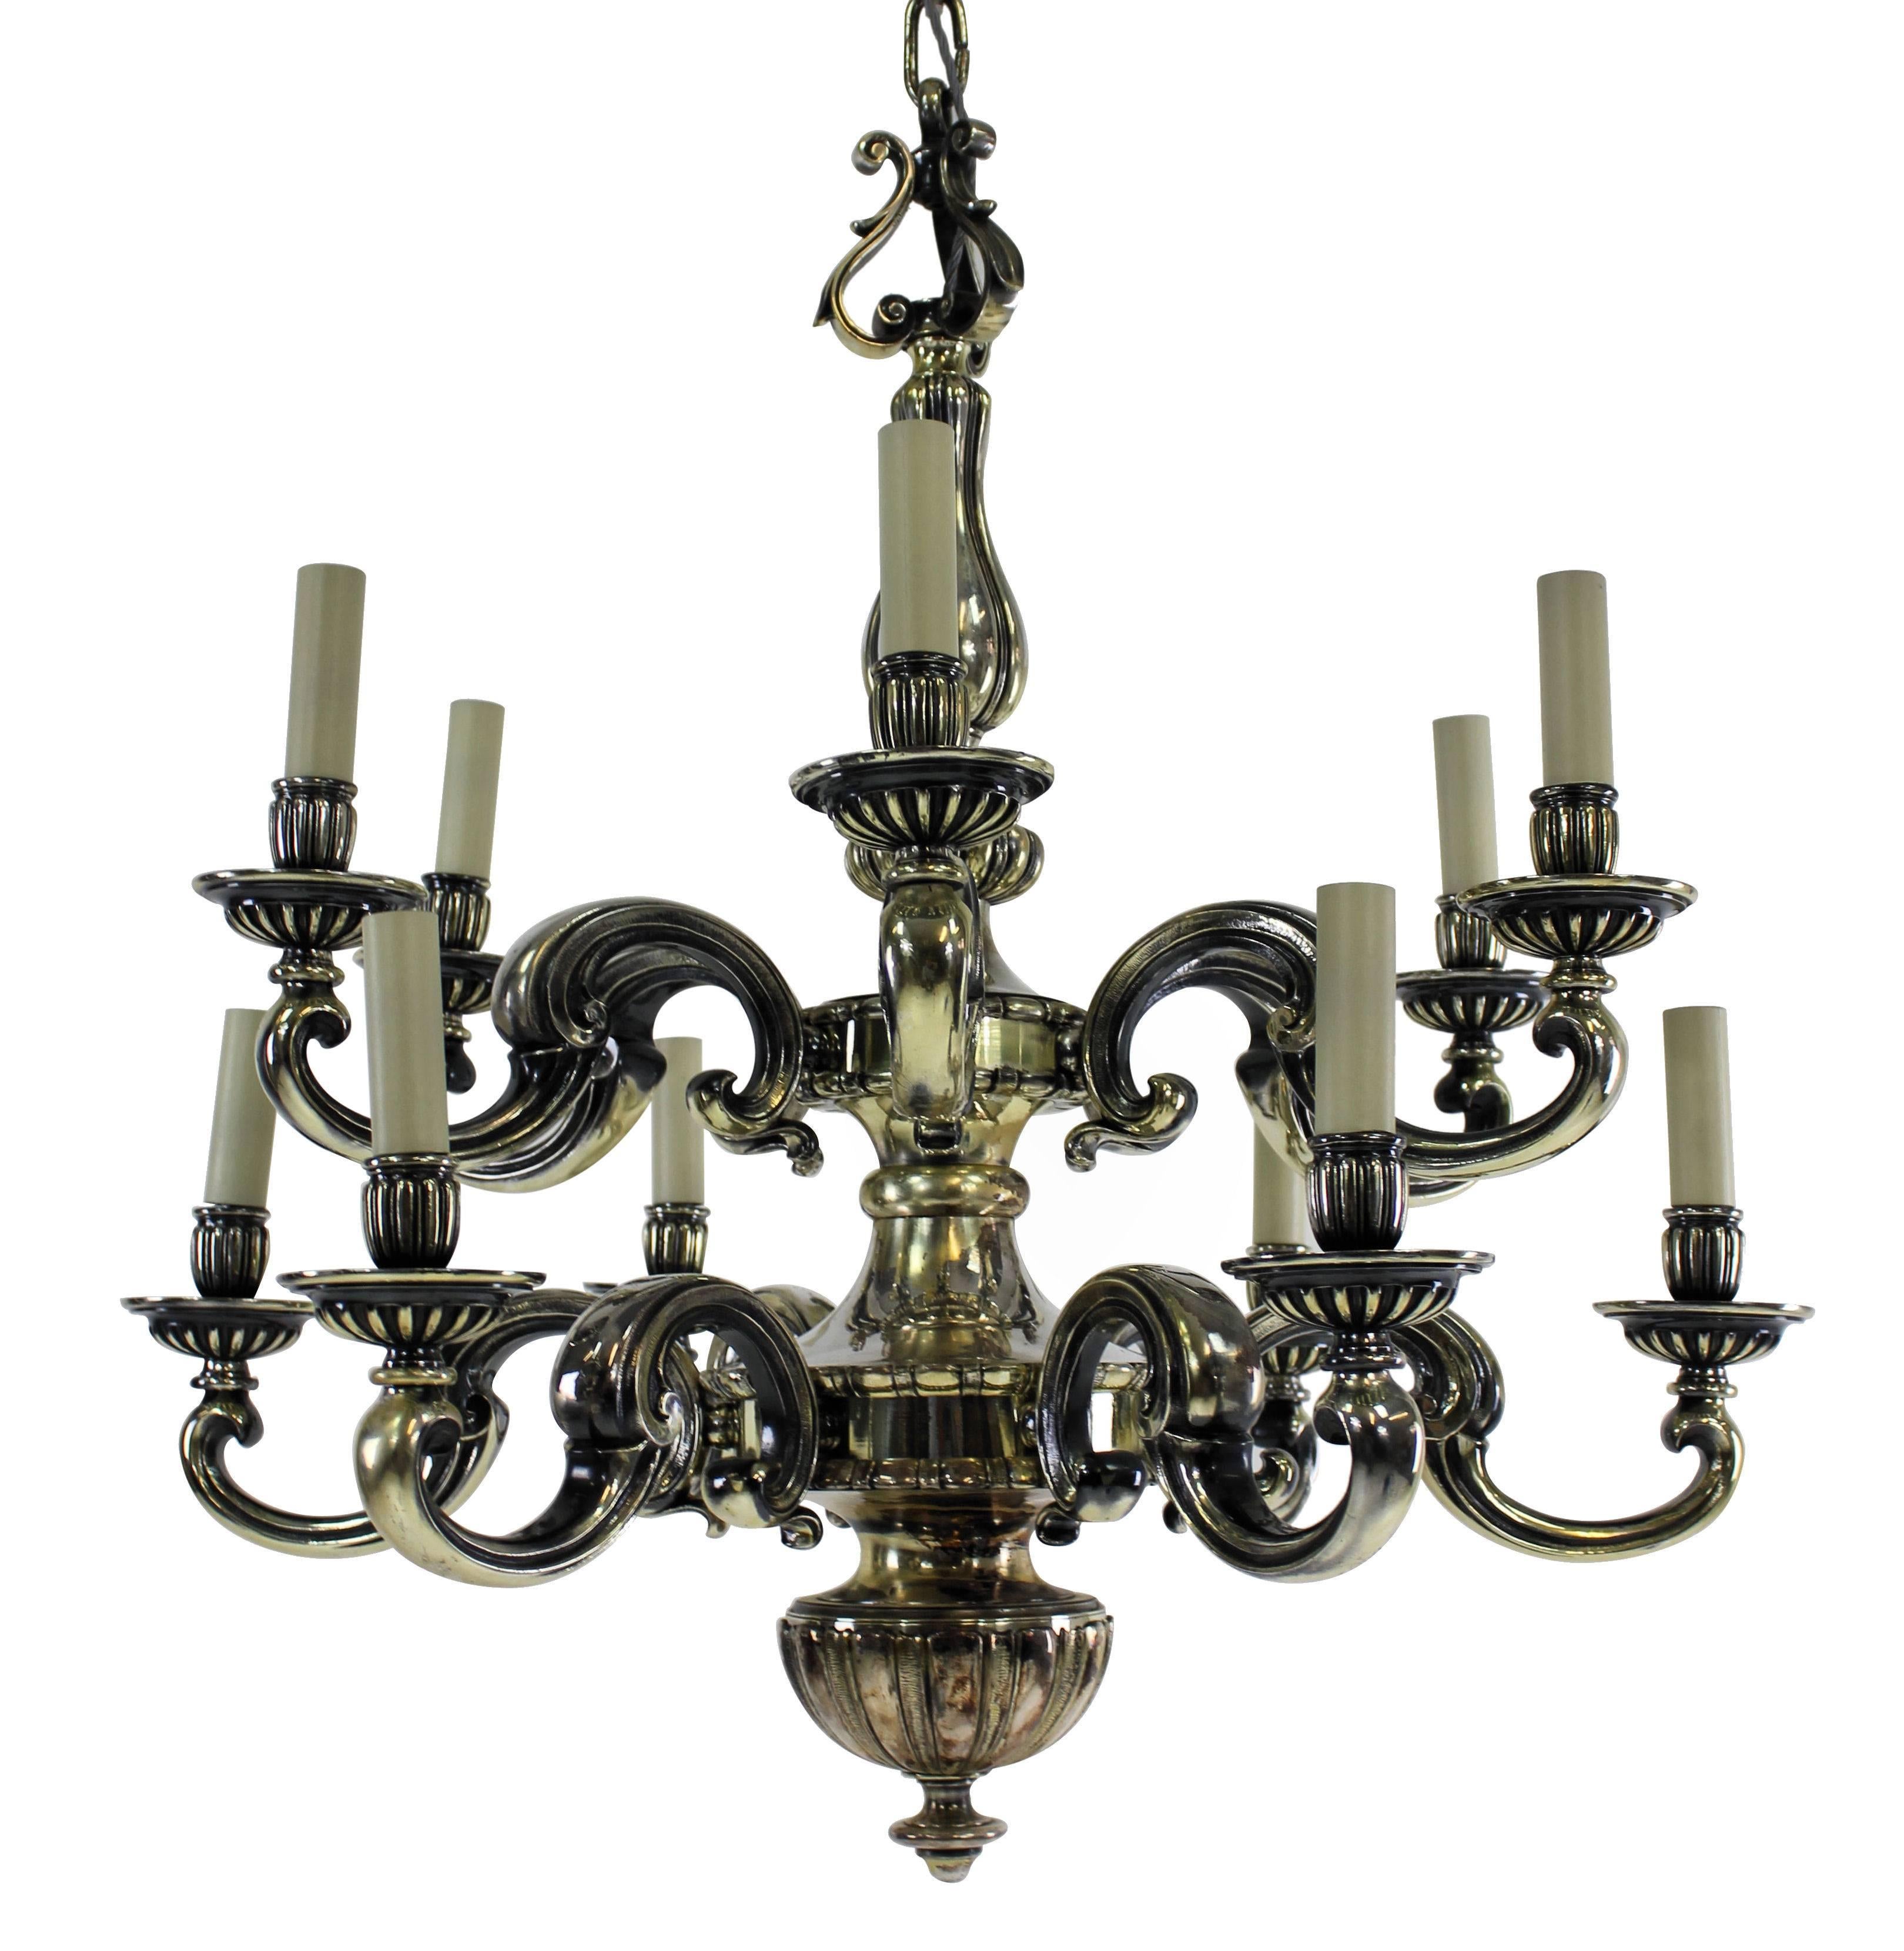 An English silver plated bronze chandelier of fine quality in the Charles II Style comprising two tiers and twelve lights in total.

Newly electrified.